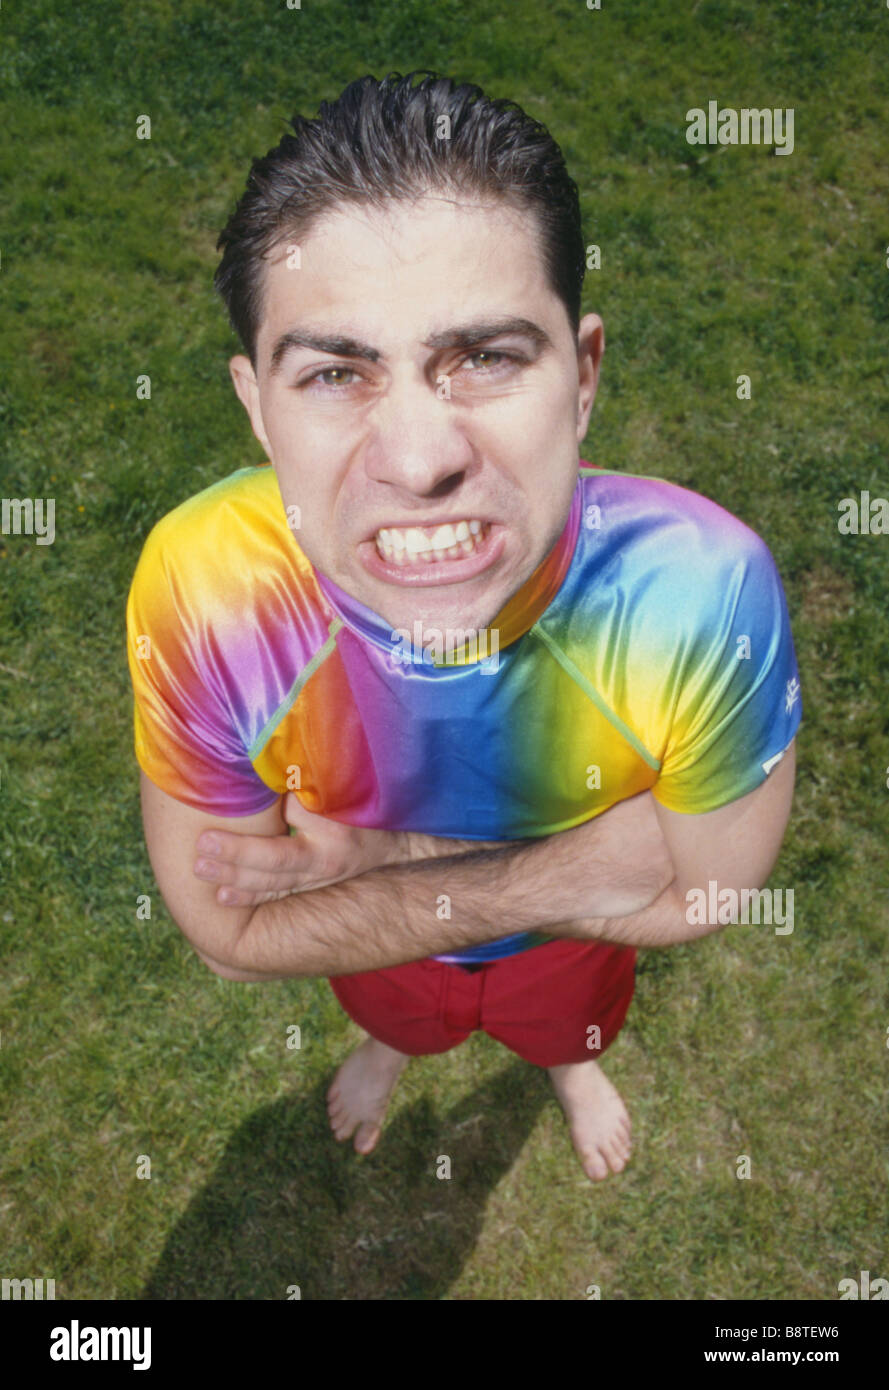 Upset Man with colored shirt and shorts standing on the lawn like a clown Stock Photo